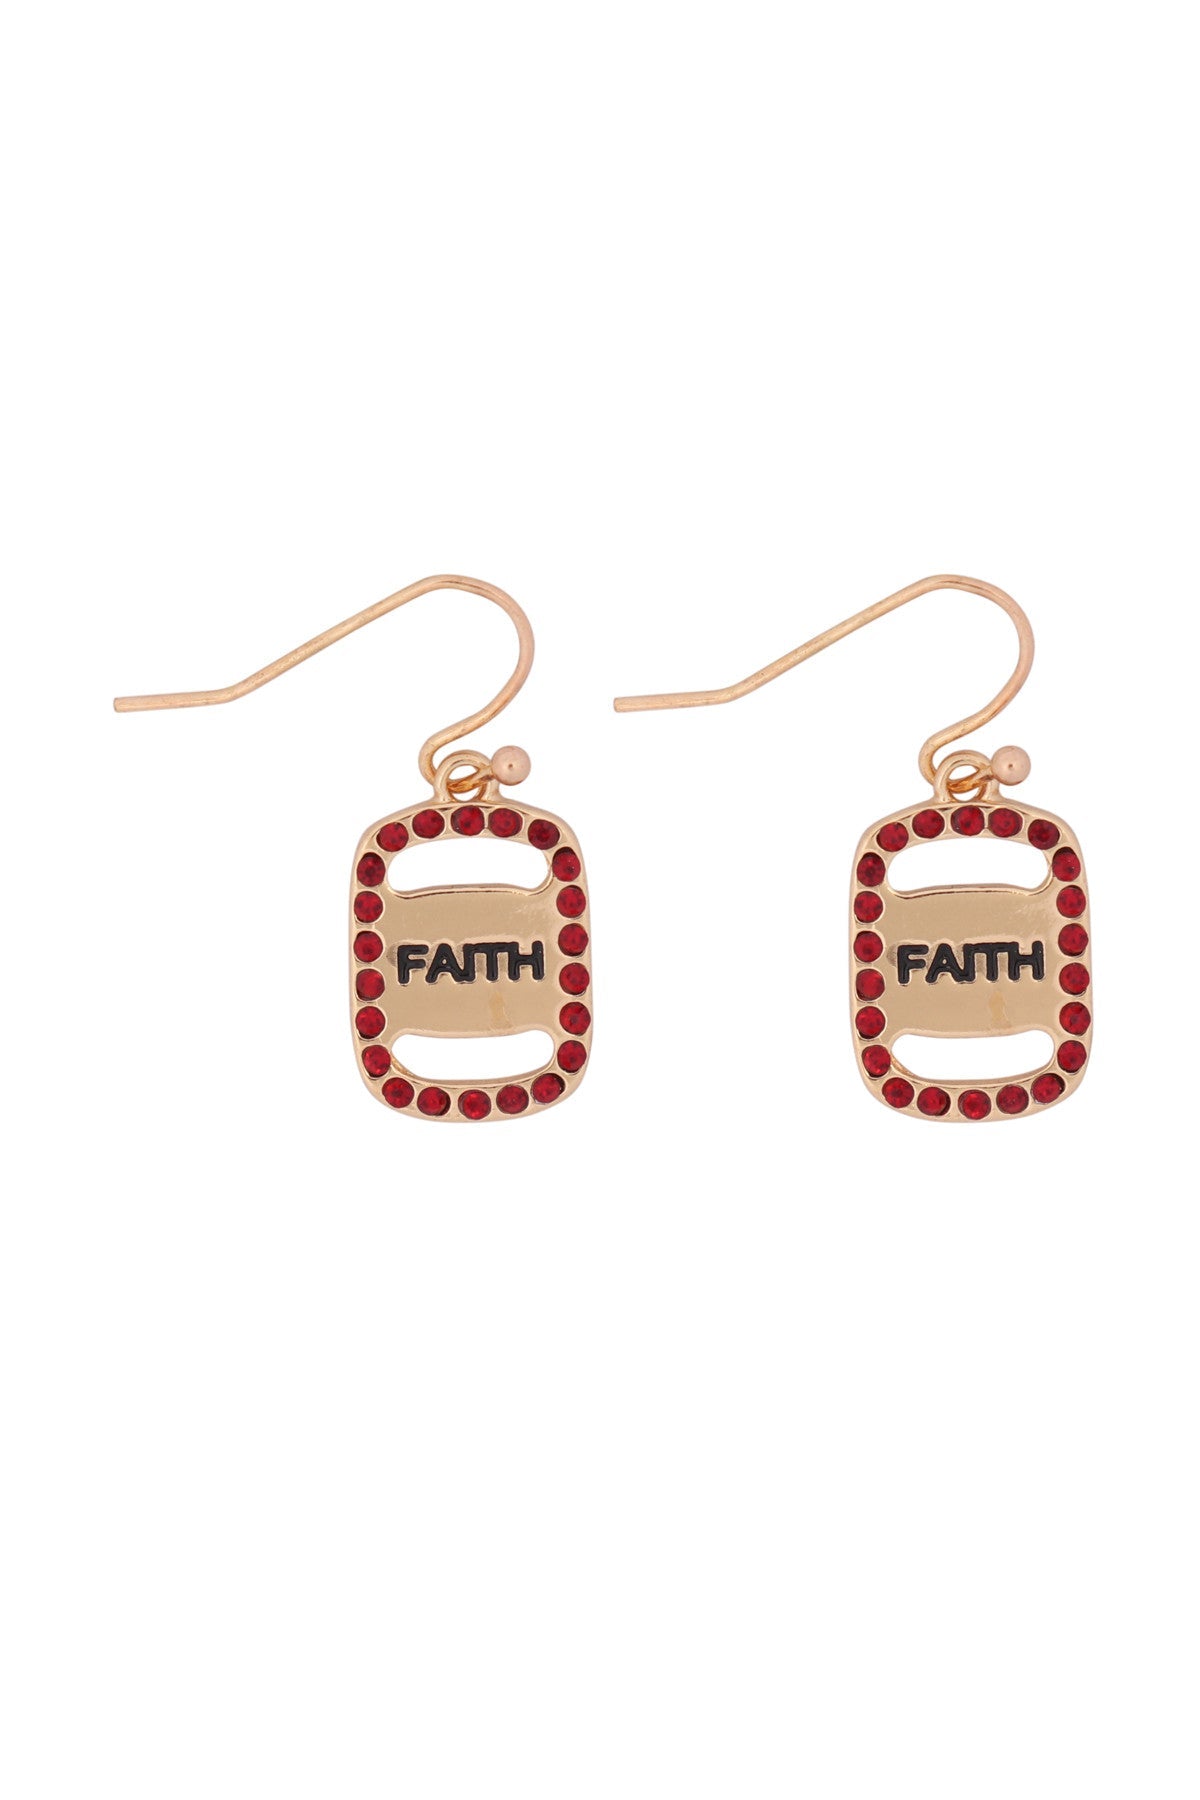 FAITH ETCHED DROP EARRINGS